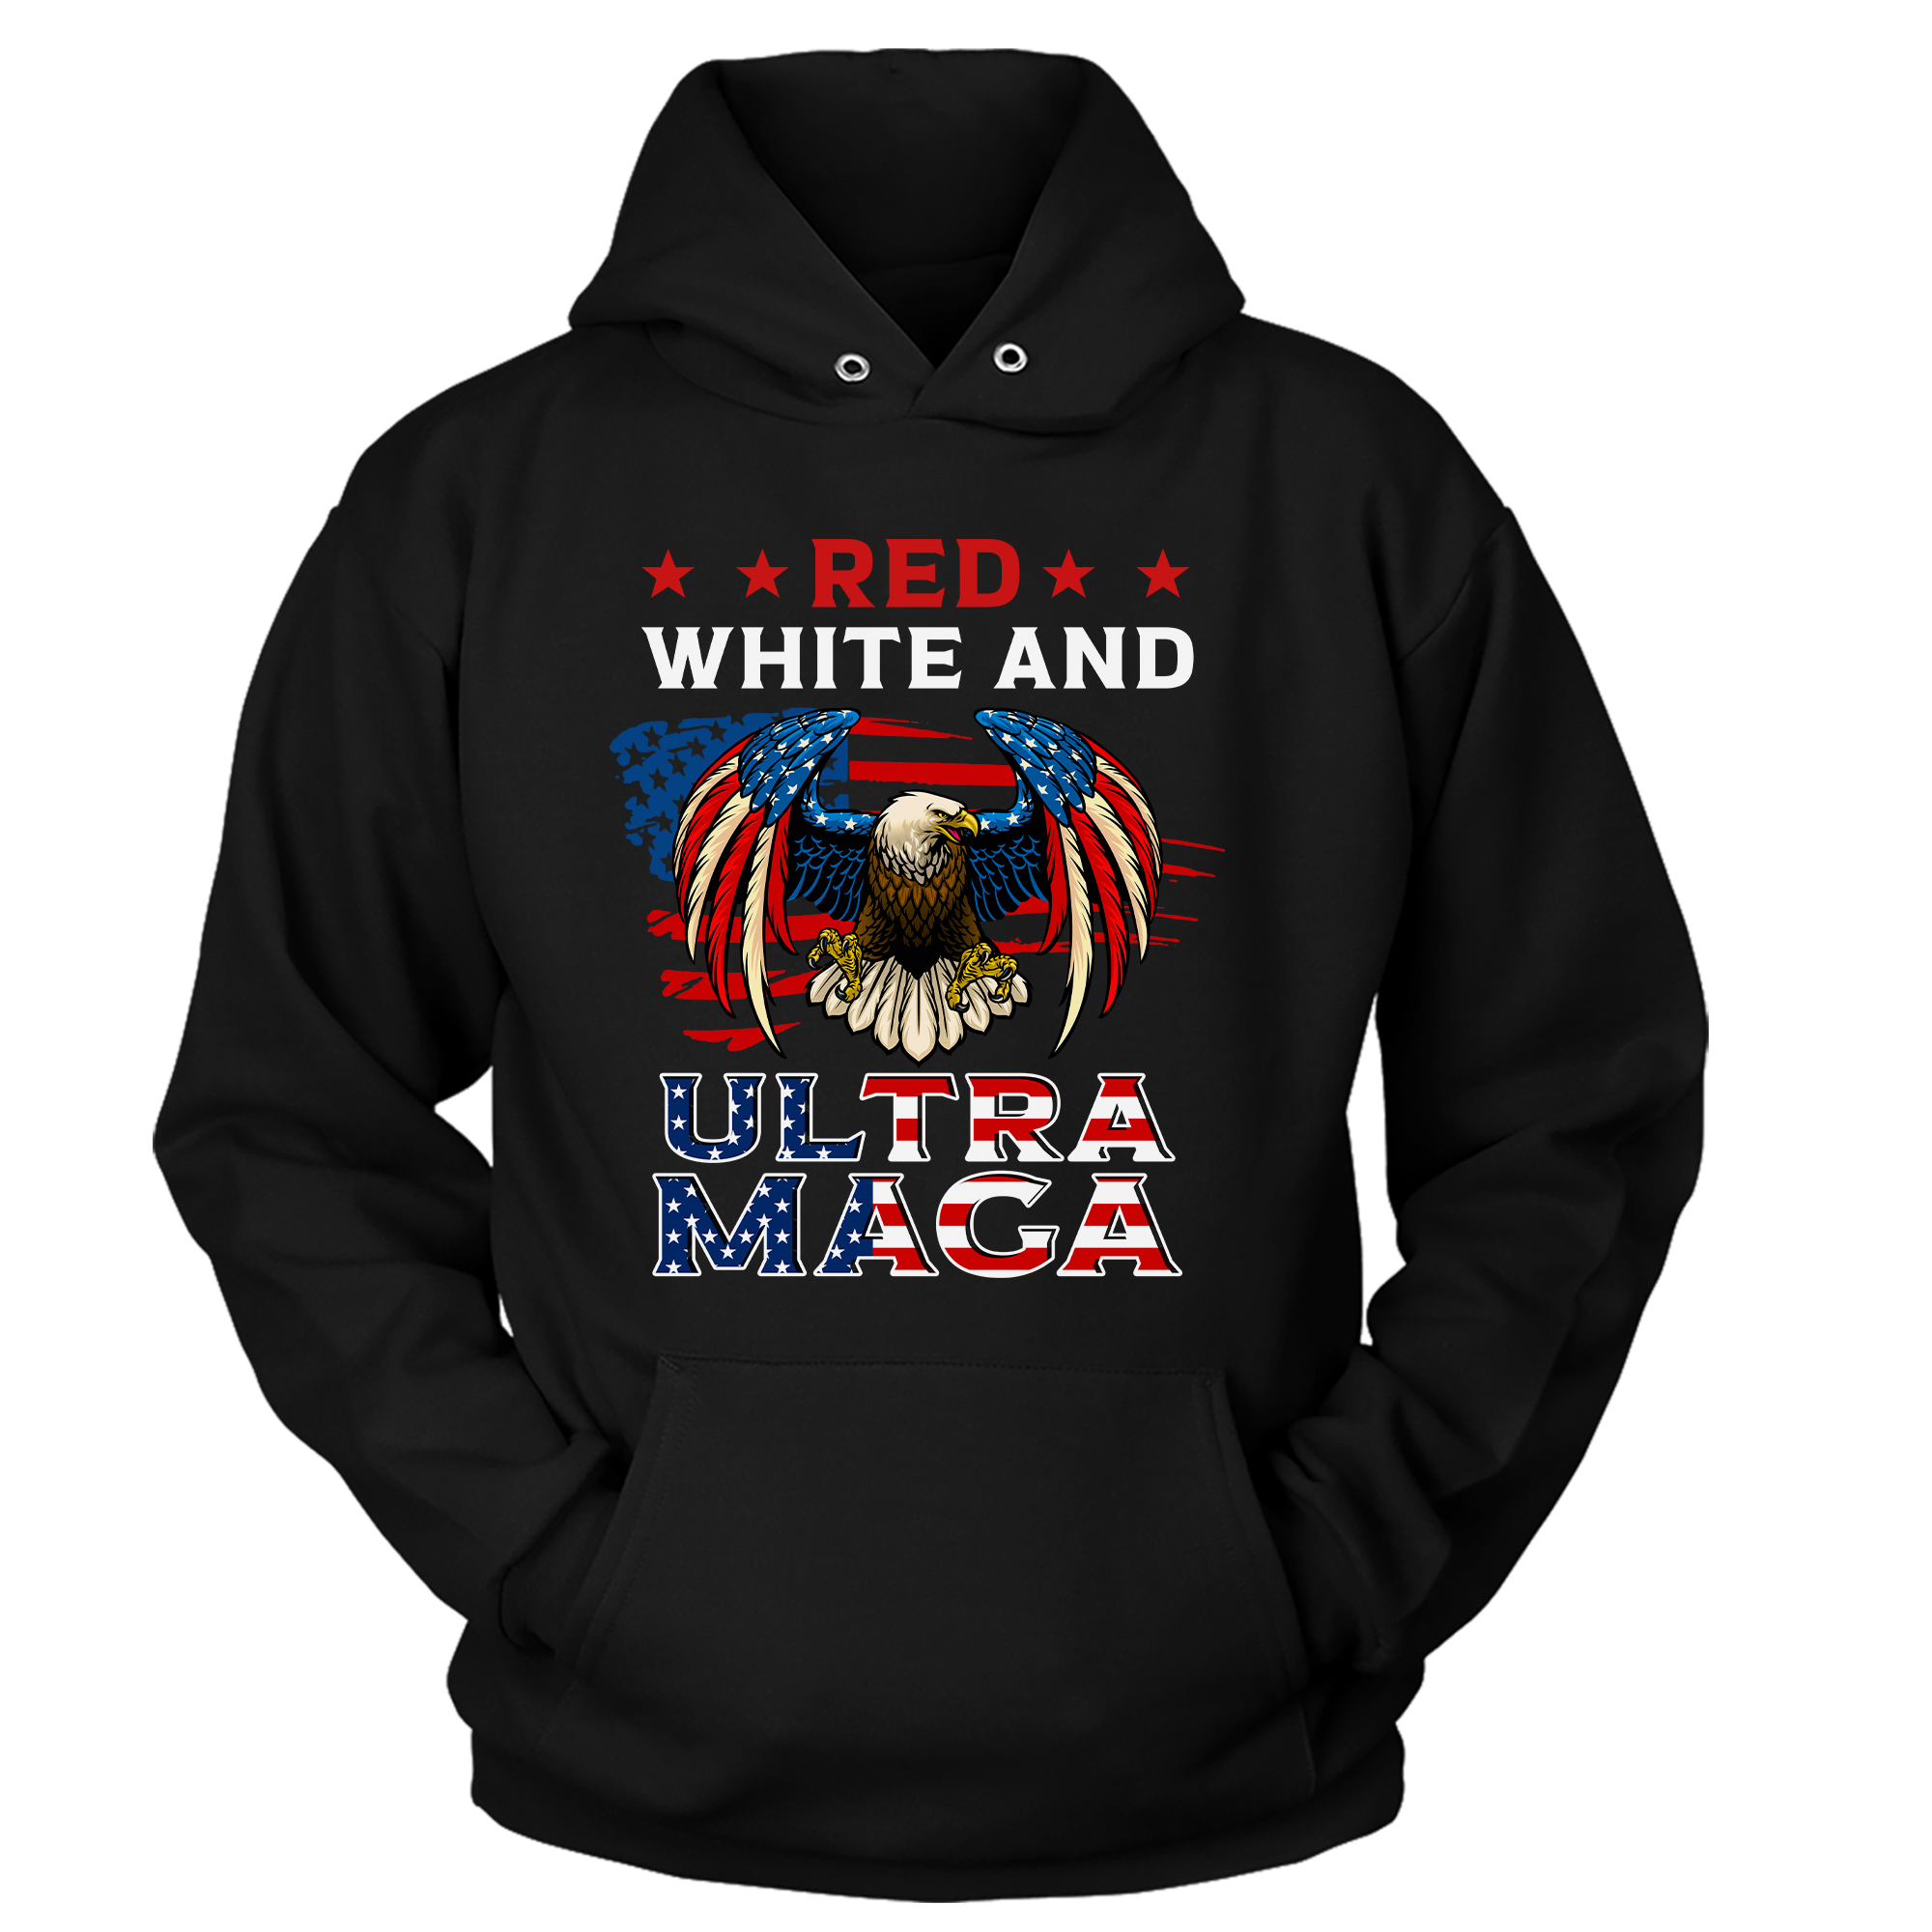 Red White And Ultra MAGA T-Shirt - GB44